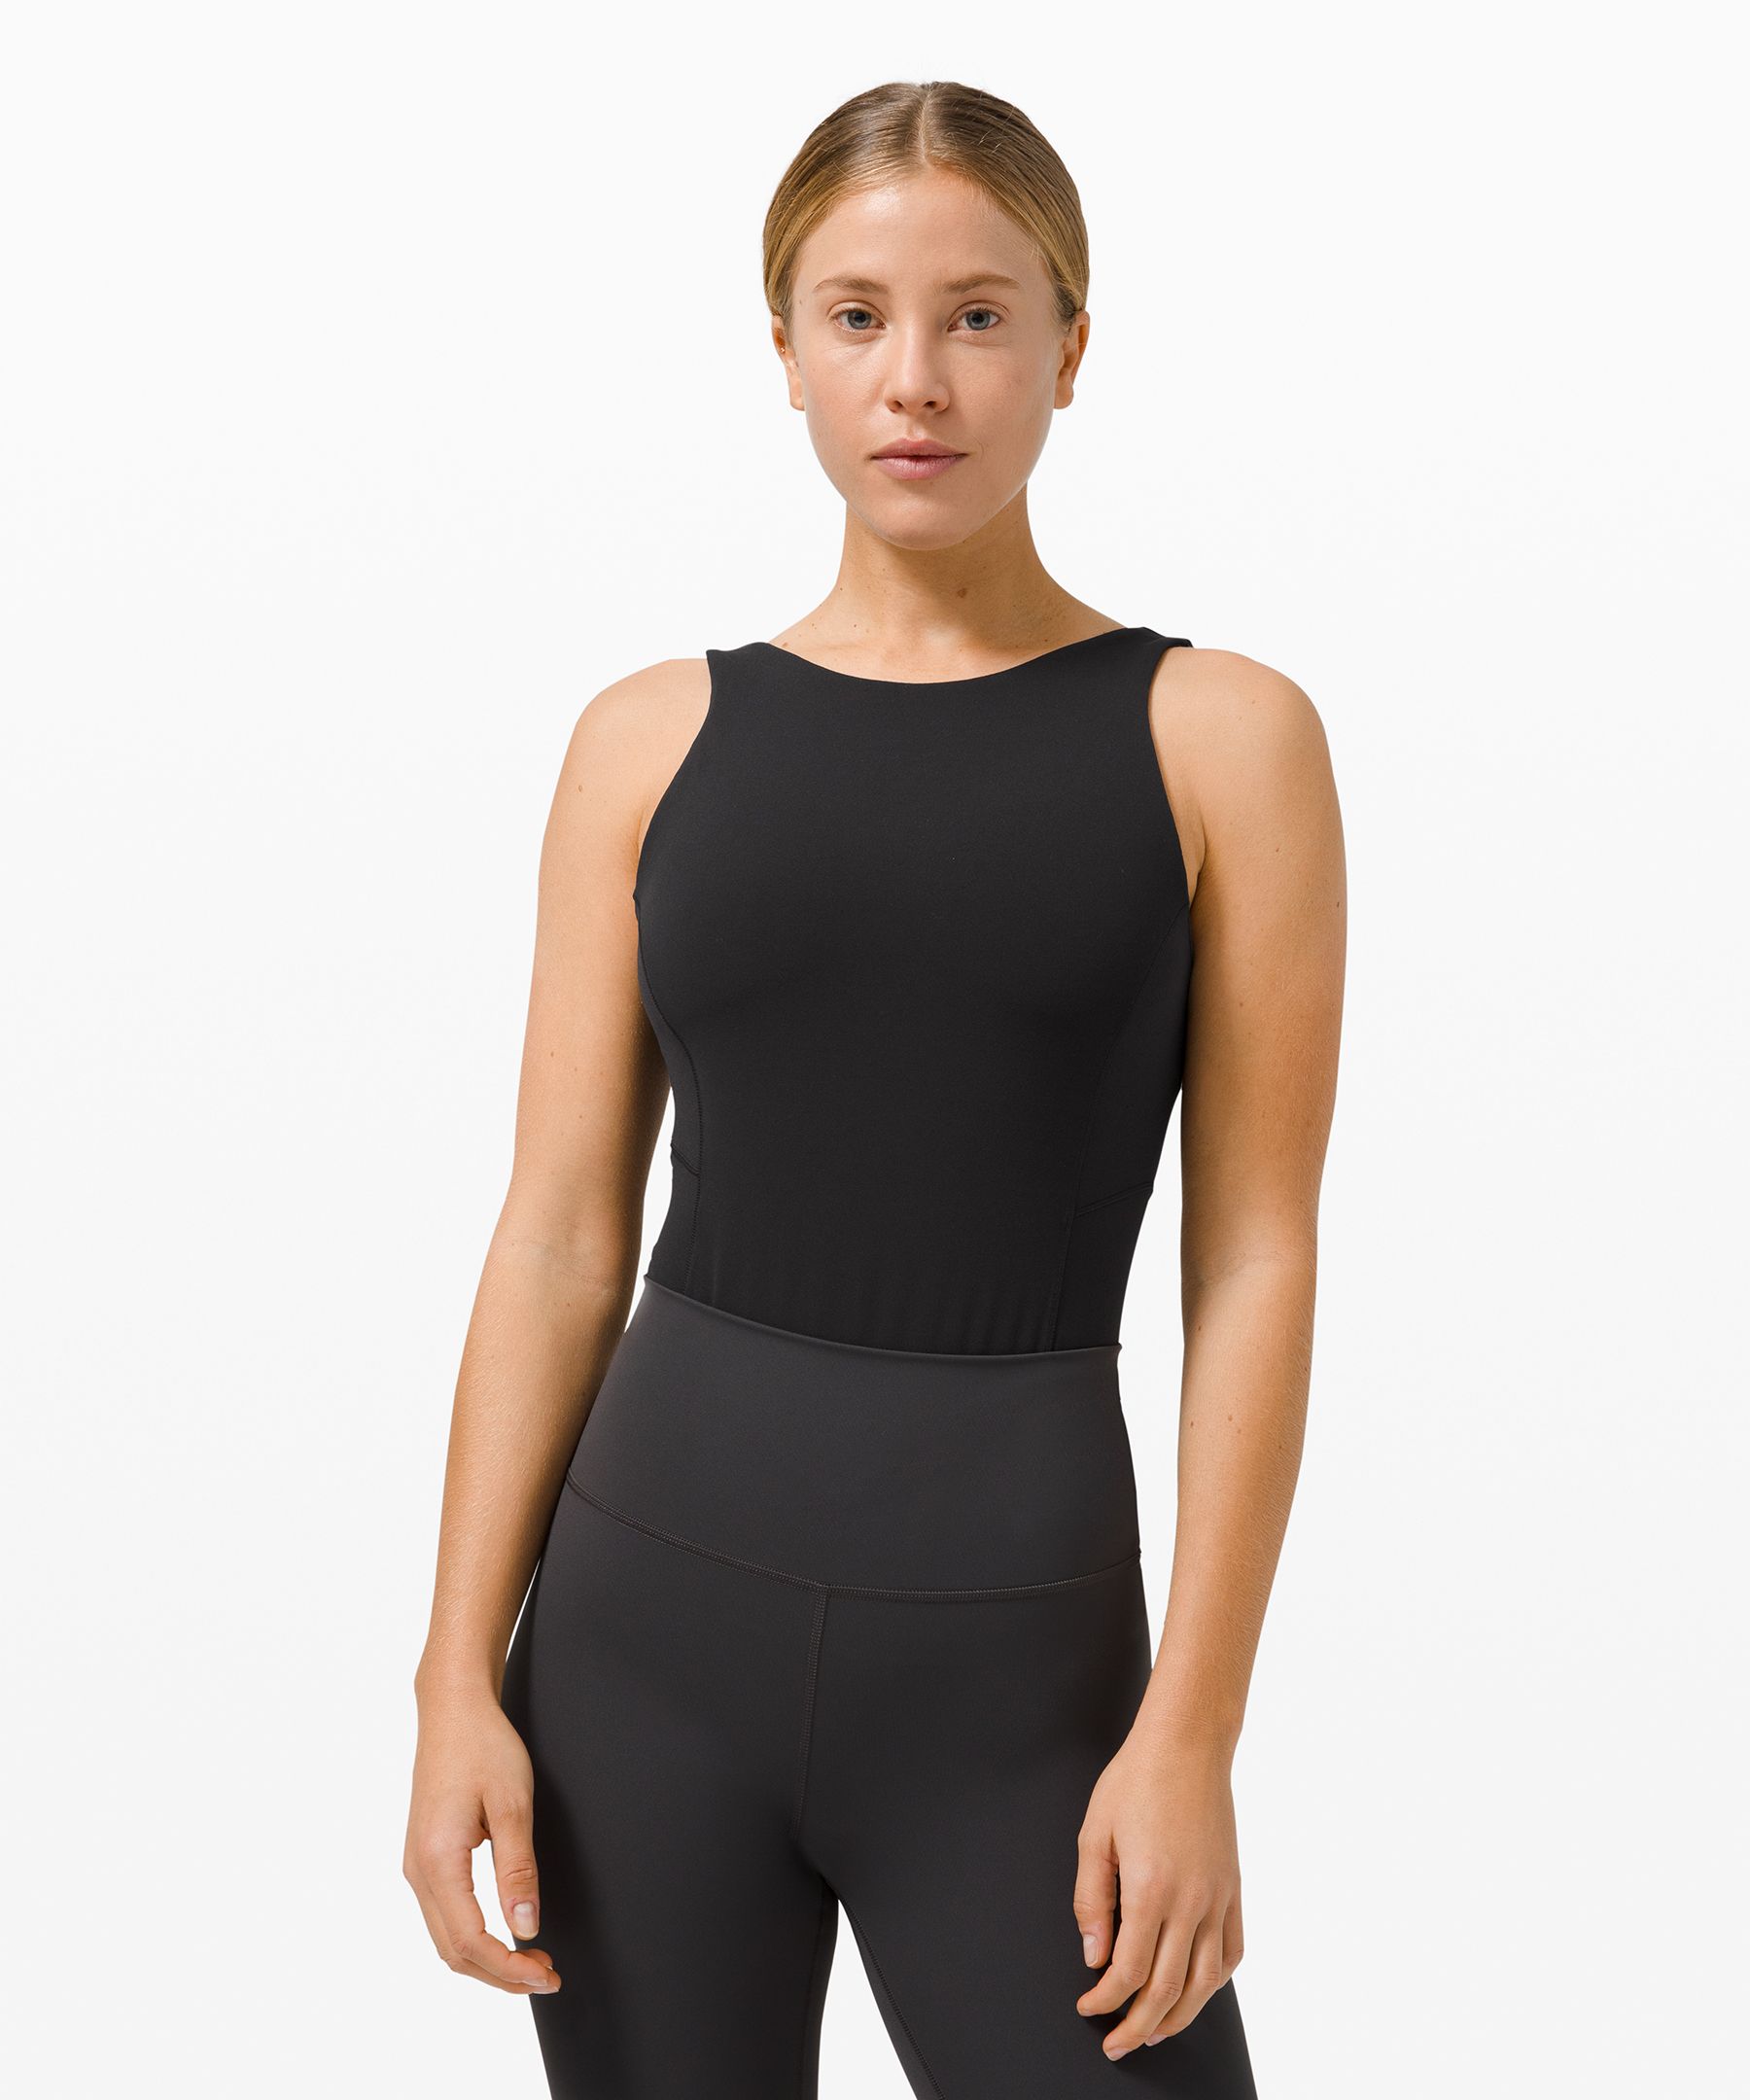 Trying the Most Popular Lululemon Align Dupes